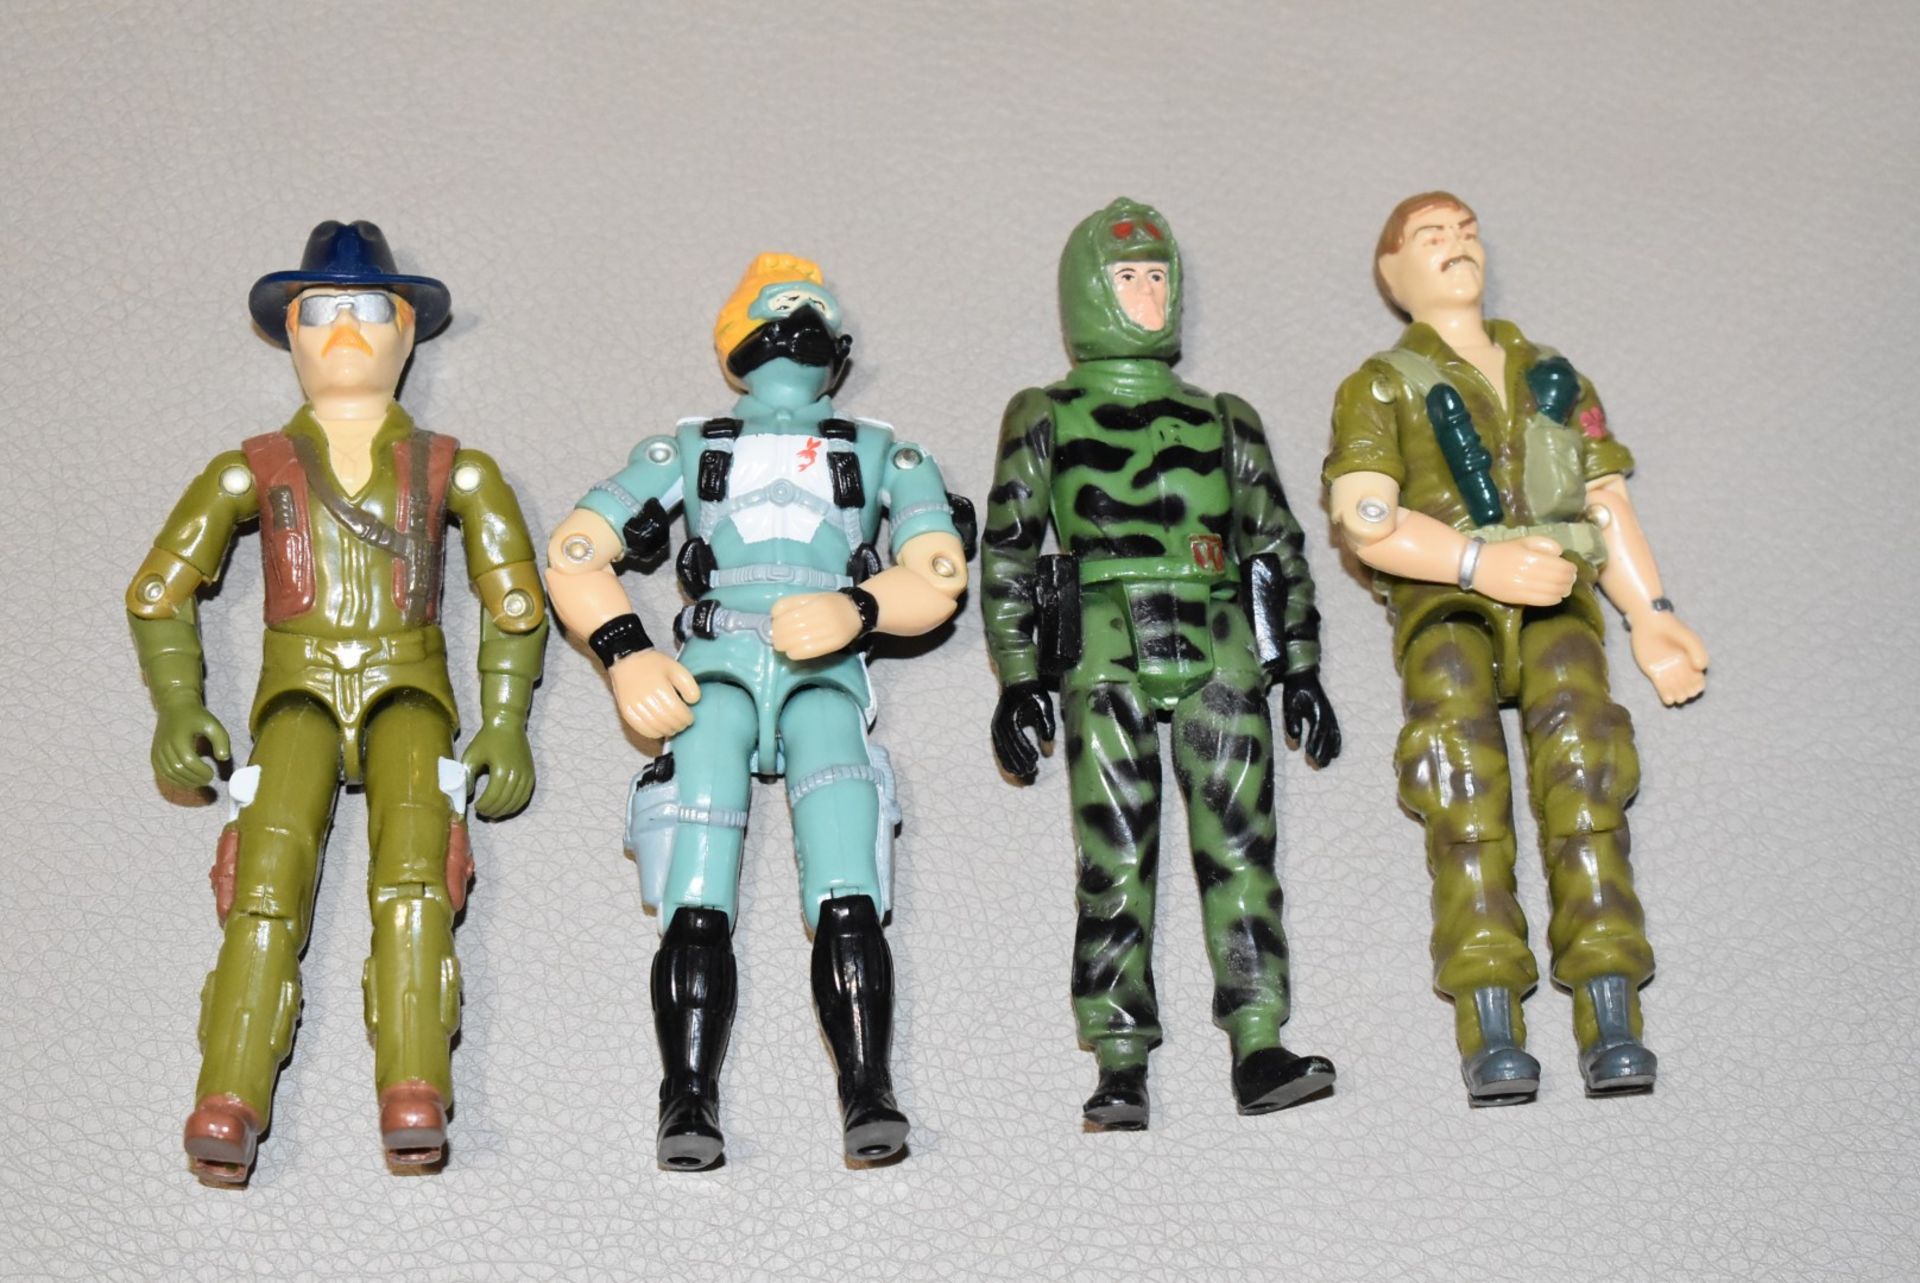 4 x Vintage Action Force Figures and Jeep - Vintage Figures in Very Good Condition - Image 2 of 3